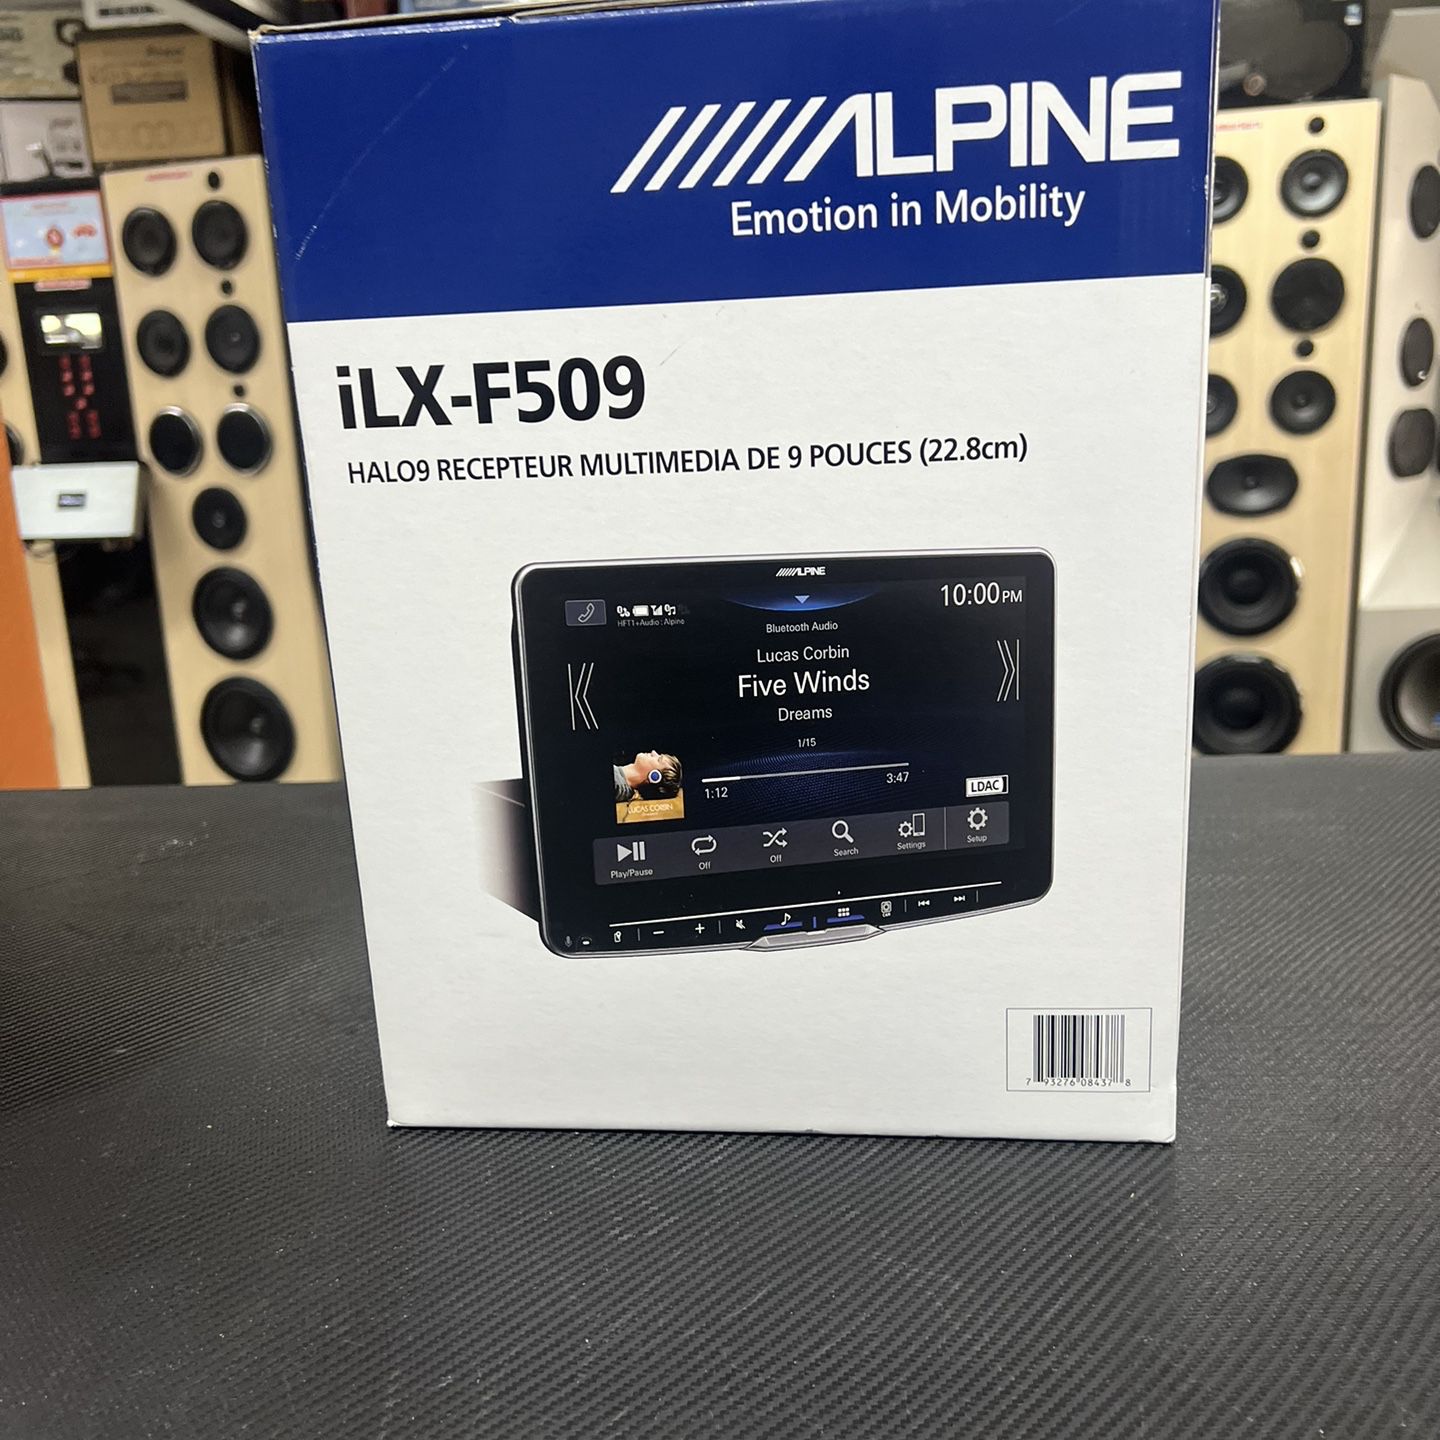 The Alpine ILX-f509 offers wireless Carplay and Android Auto functionality for your vehicle. Make 13 payments of $89 each with our 100-day no credit n